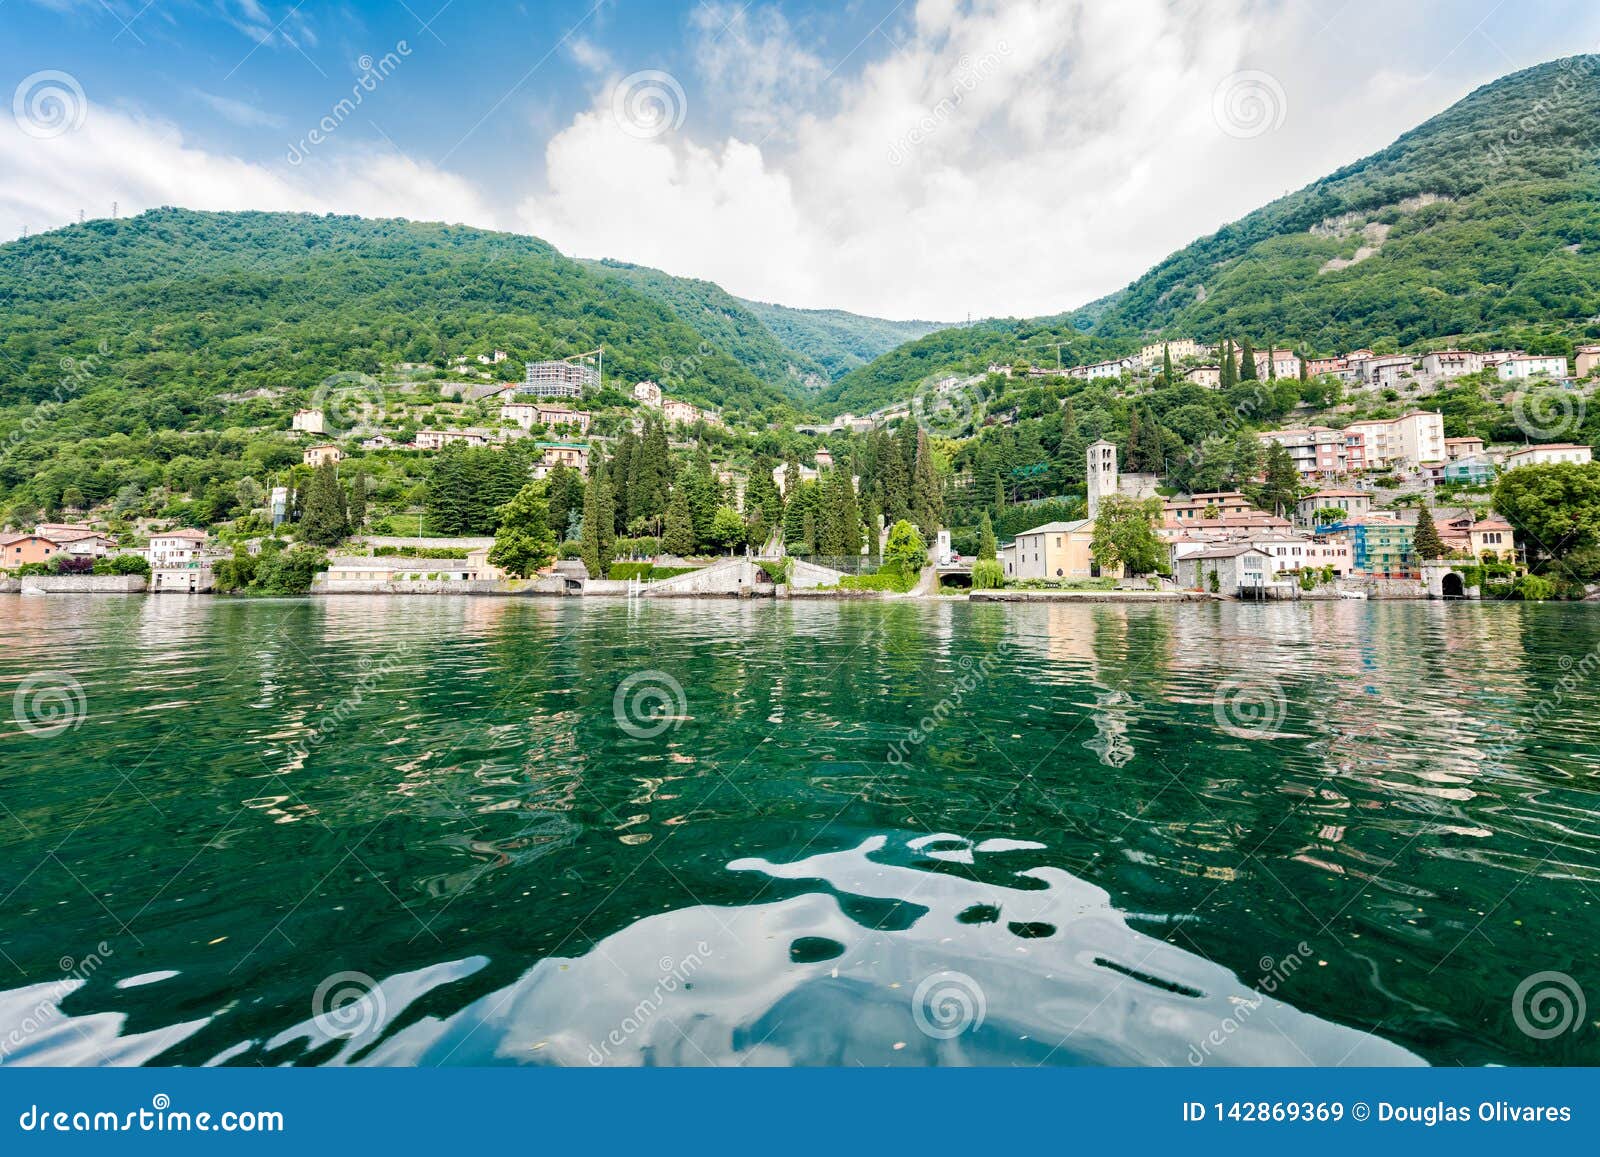 the most beautiful lake on the world lago como. lombardy, italy